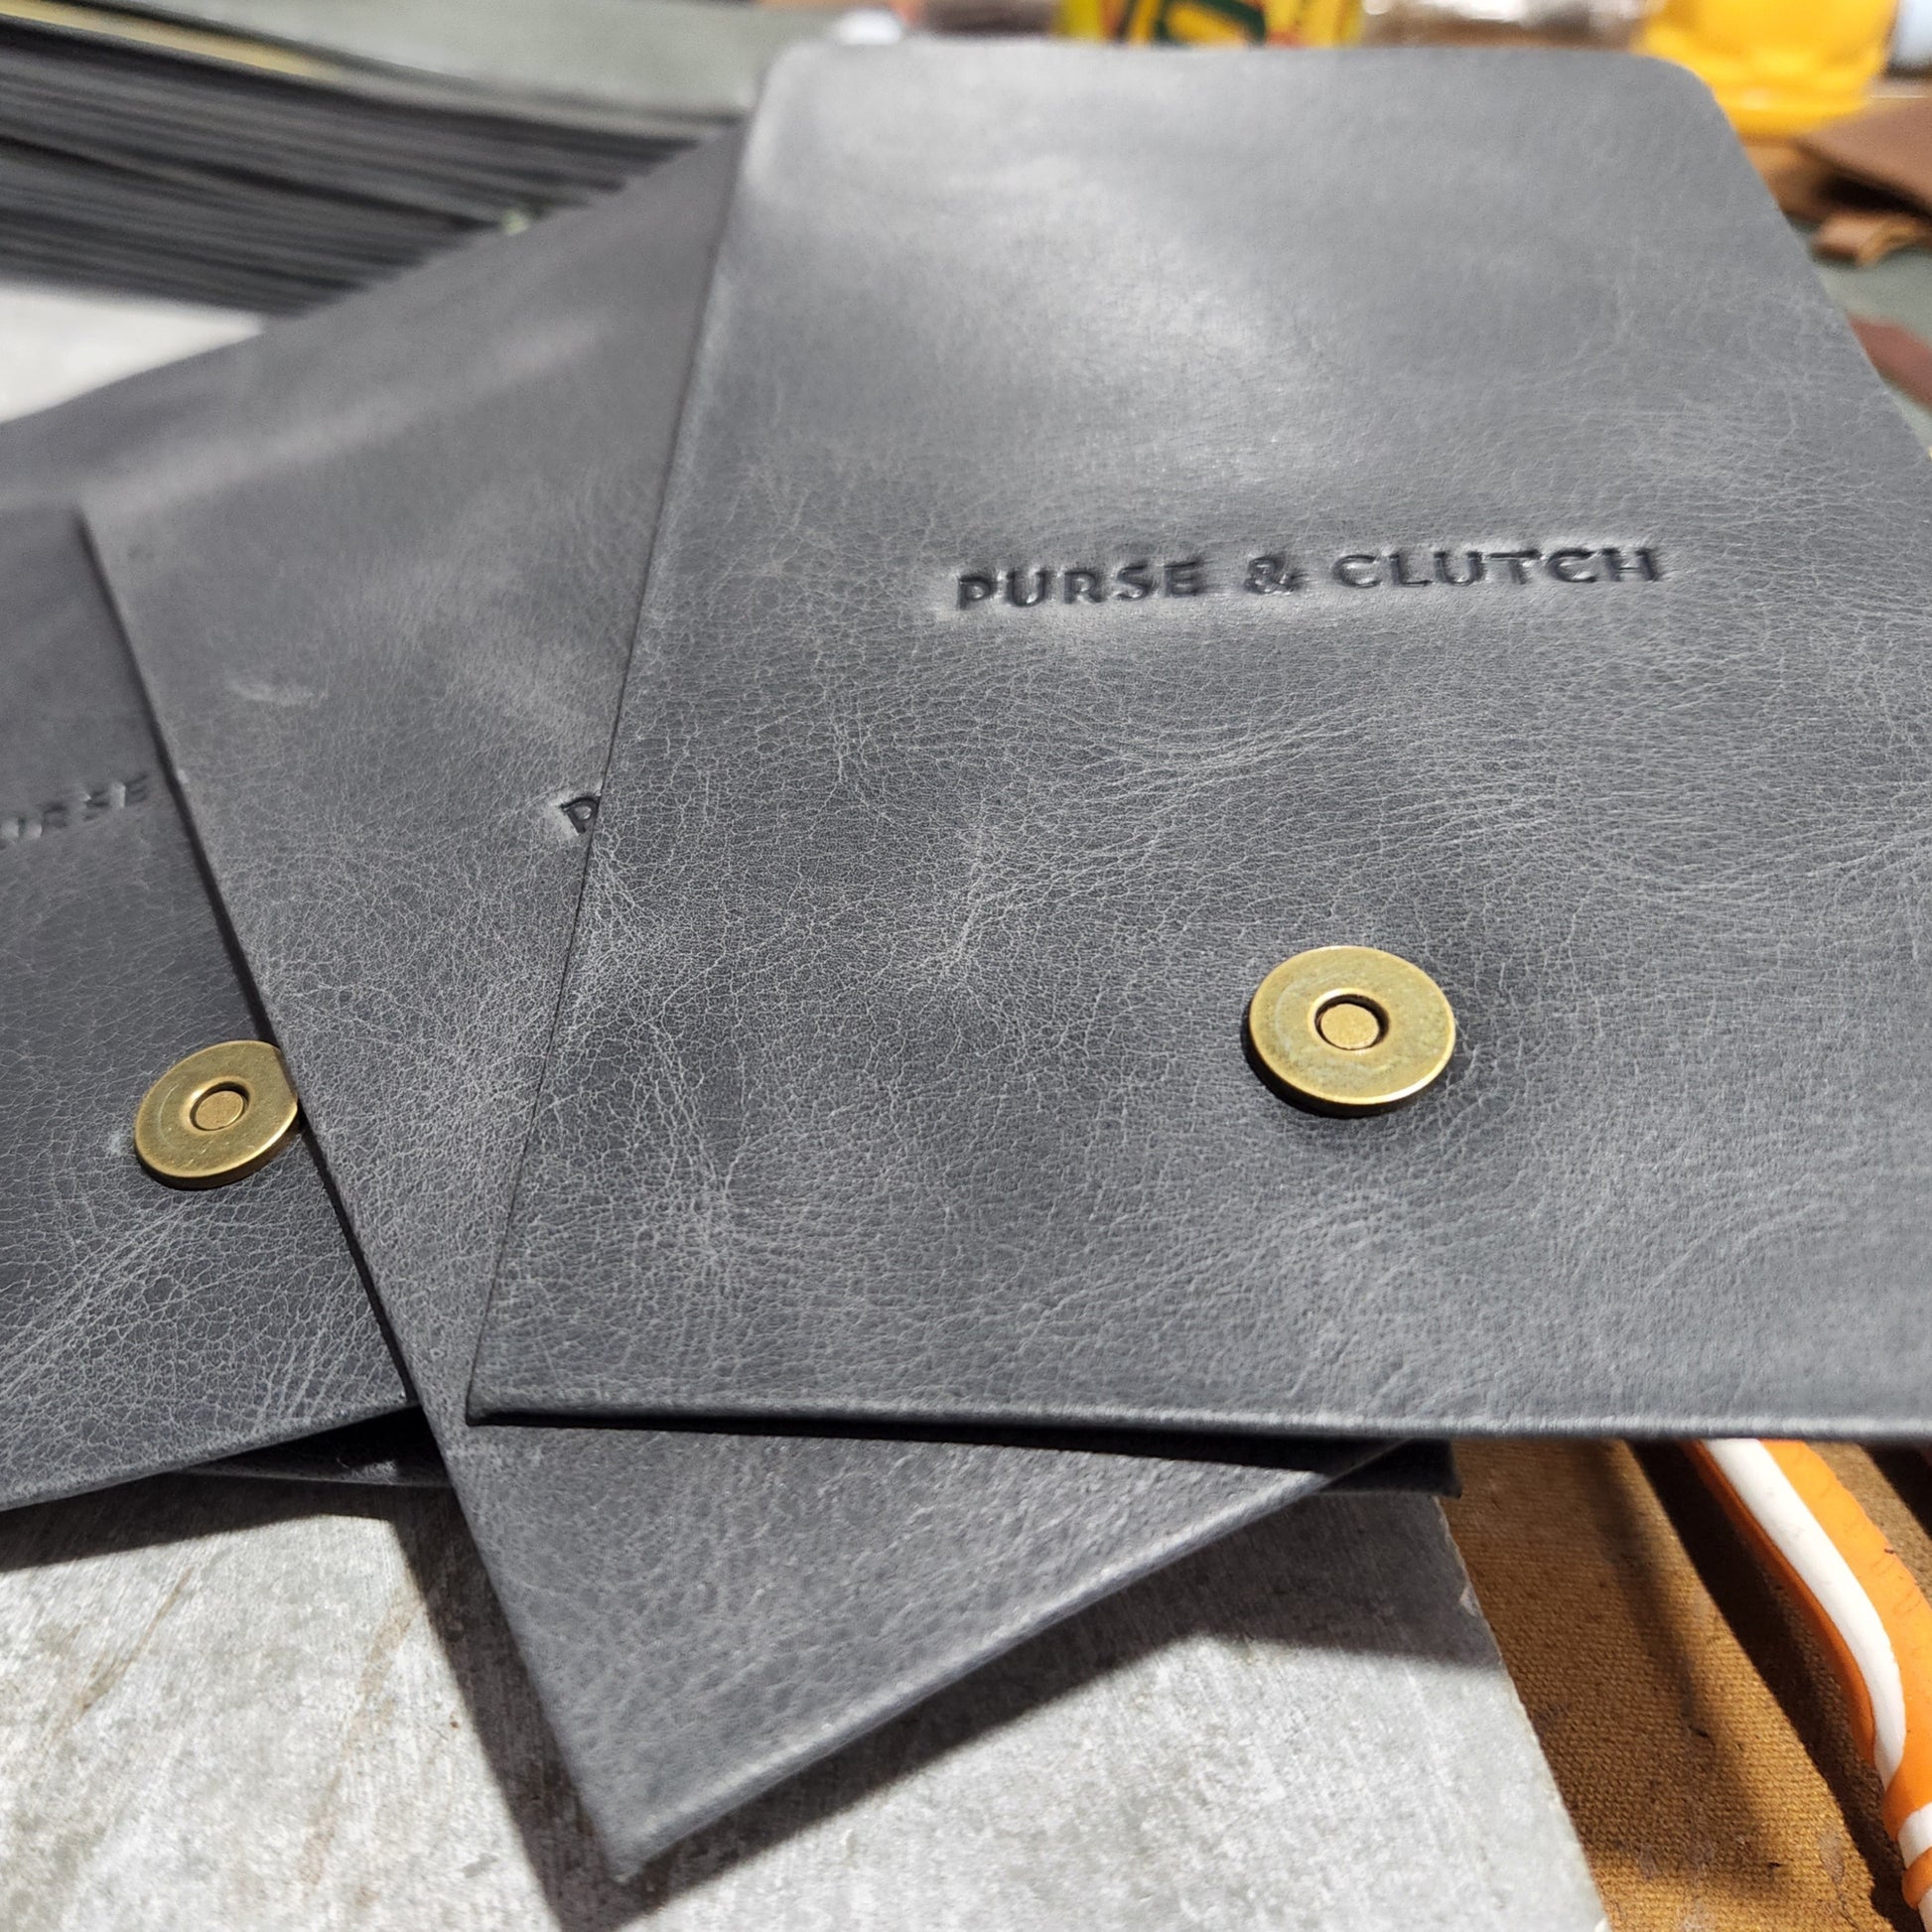 Ethically handmade leather card carriers